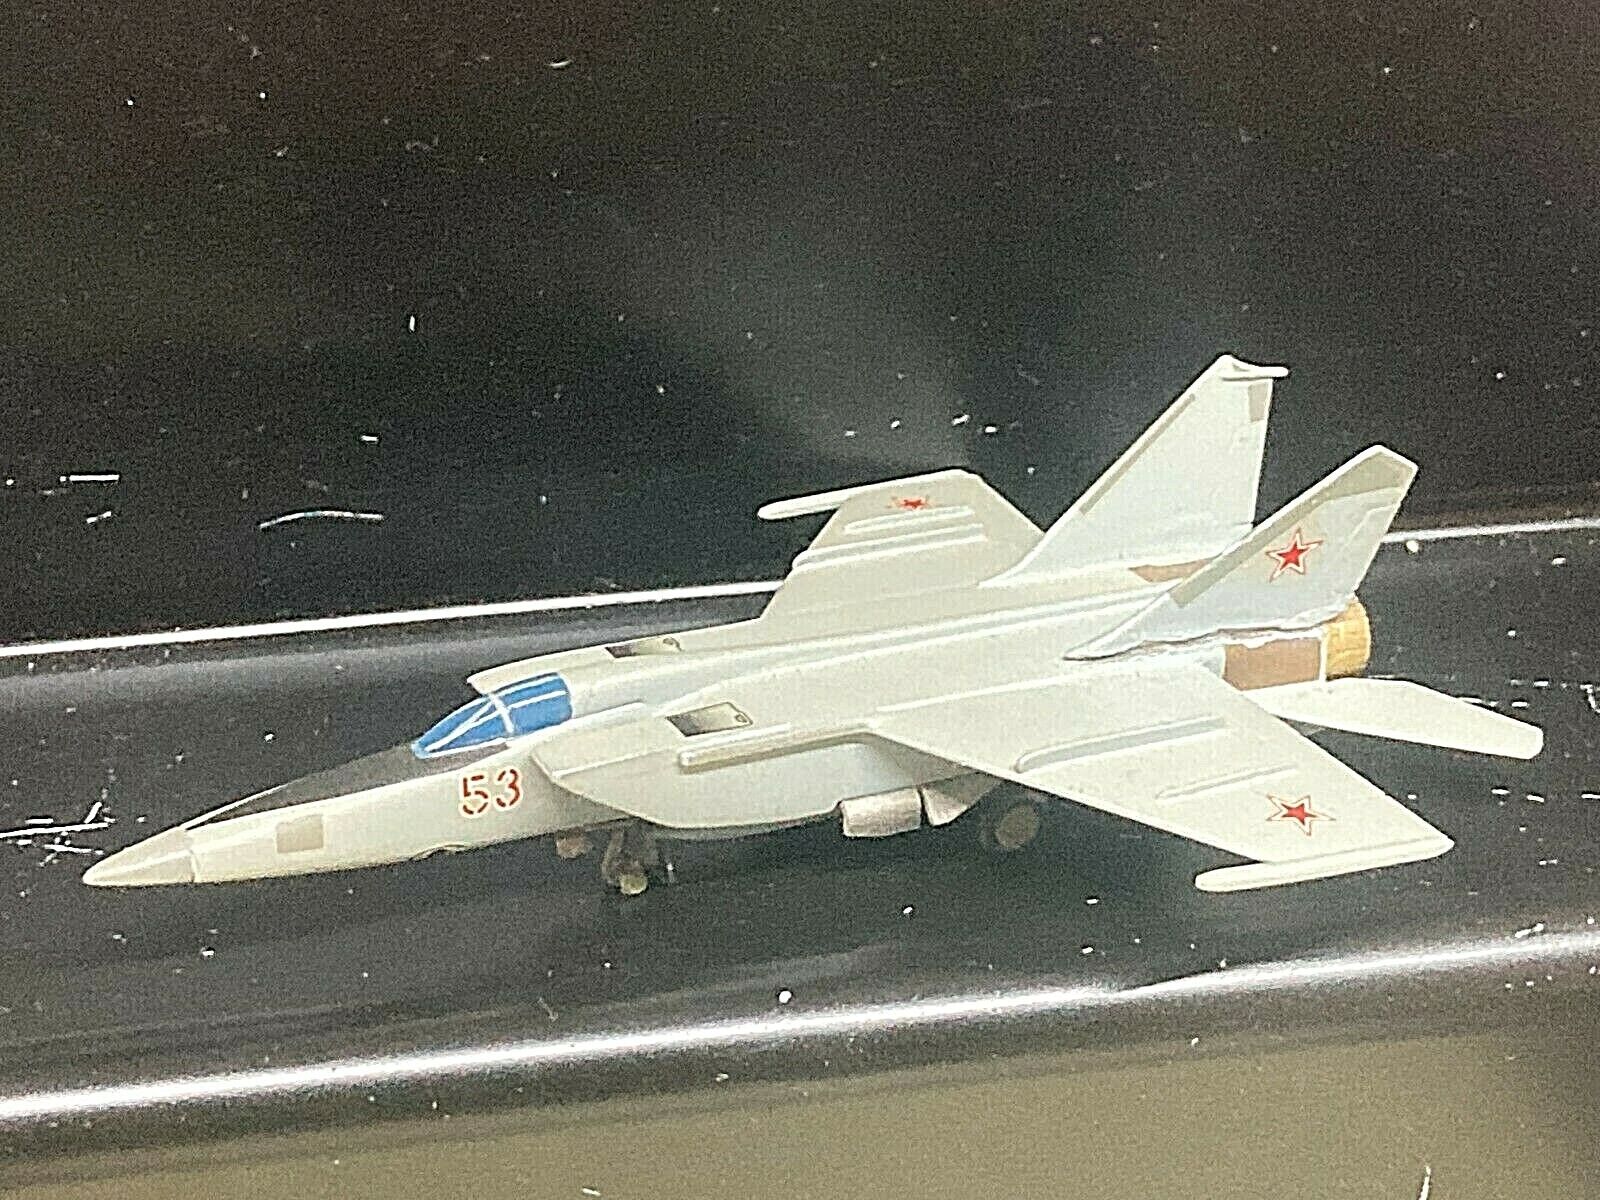 ECLIPSE MODELS 1:200 MIG 31 FOXHOUND - PAINTED & FINISHED - METAL MODEL